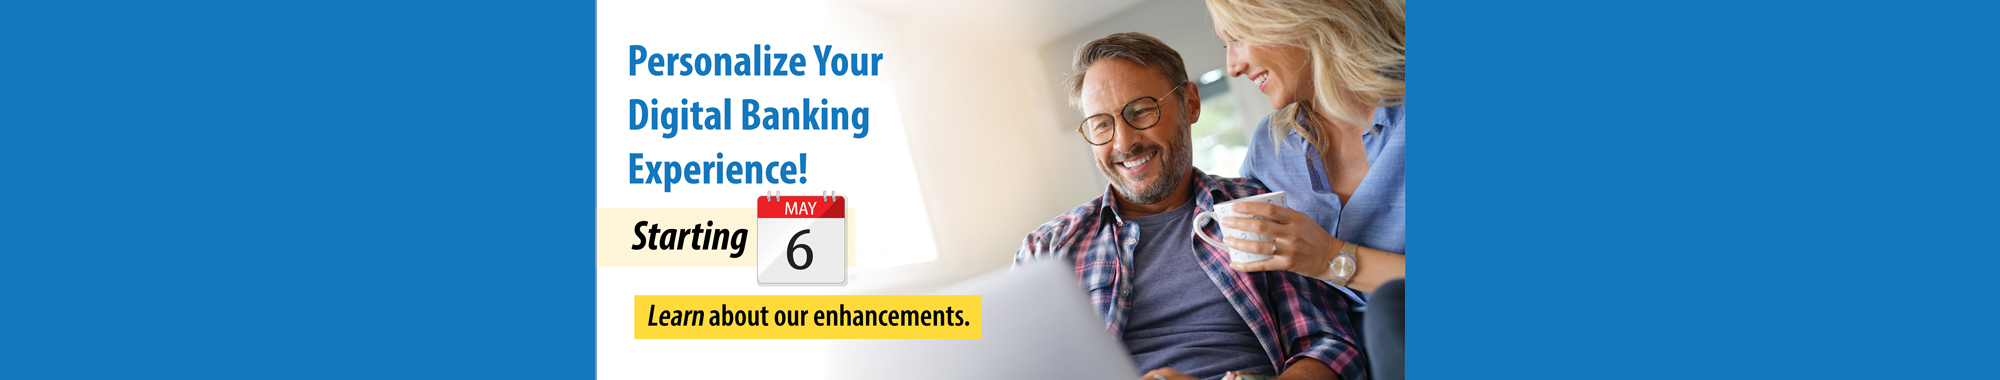 Personalize Your Digital Banking Experience! Starting May 6. Learn about our enhancements.